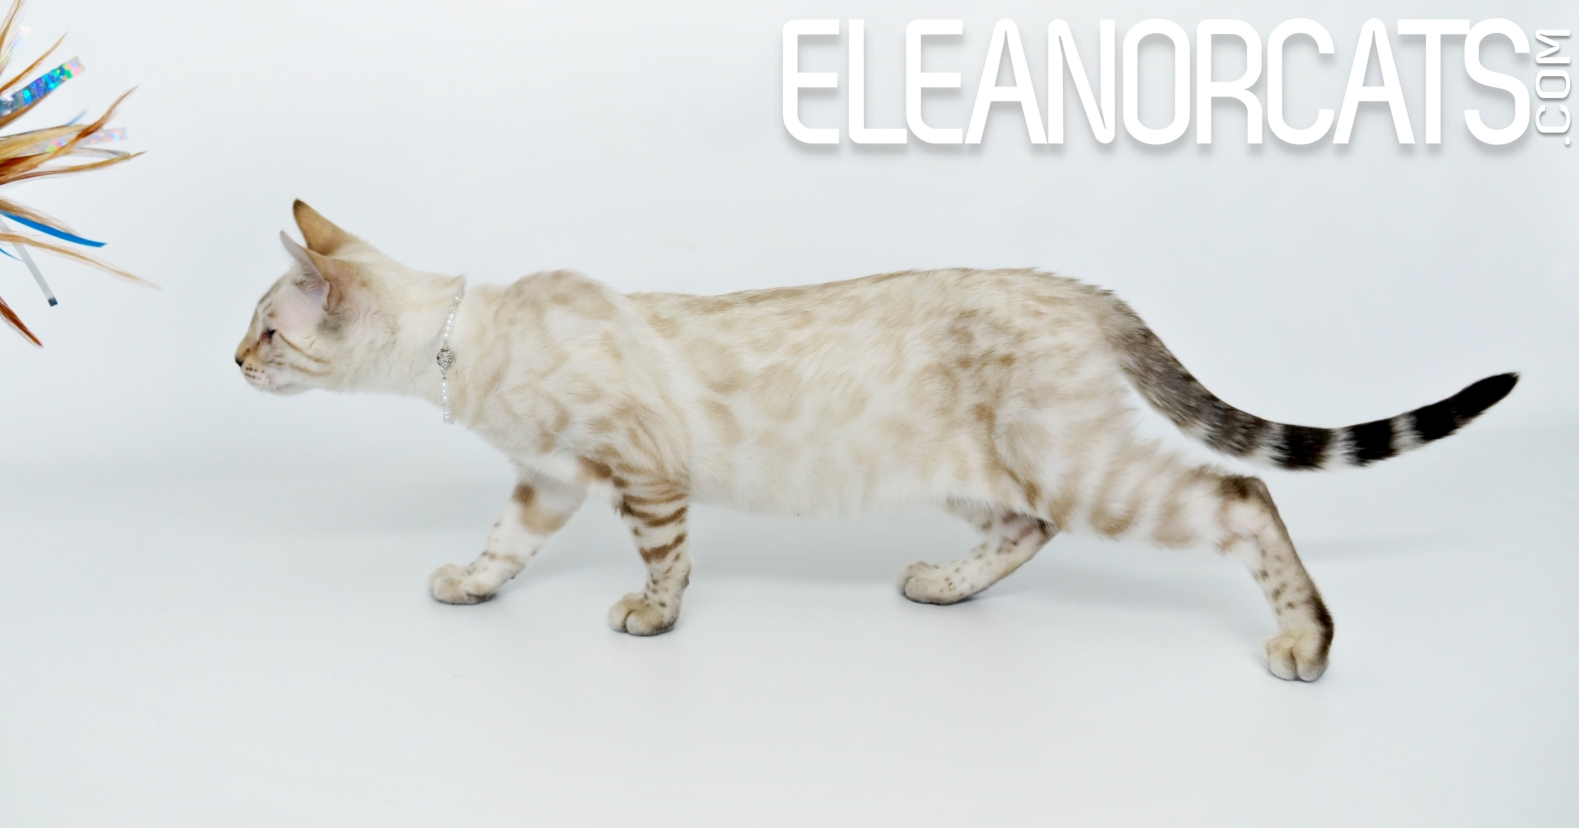 Crystal ELEANORCATS Bengal seal lynx spotted